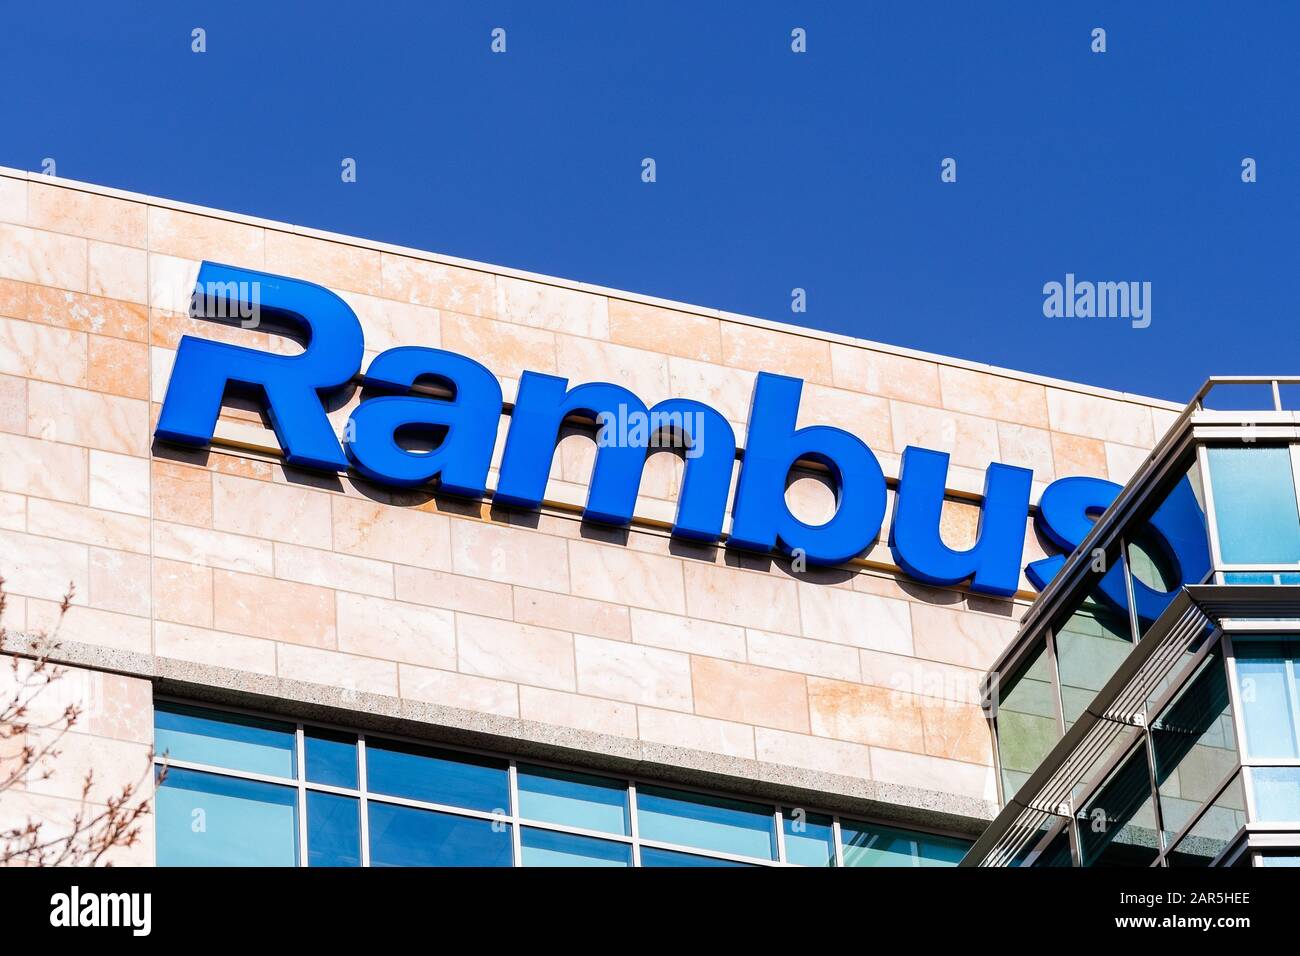 Jan 24, 2020 Sunnyvale / CA / USA - Rambus corporate headquarters in Silicon Valley. Rambus Inc. is an American technology licensing company specializ Stock Photo